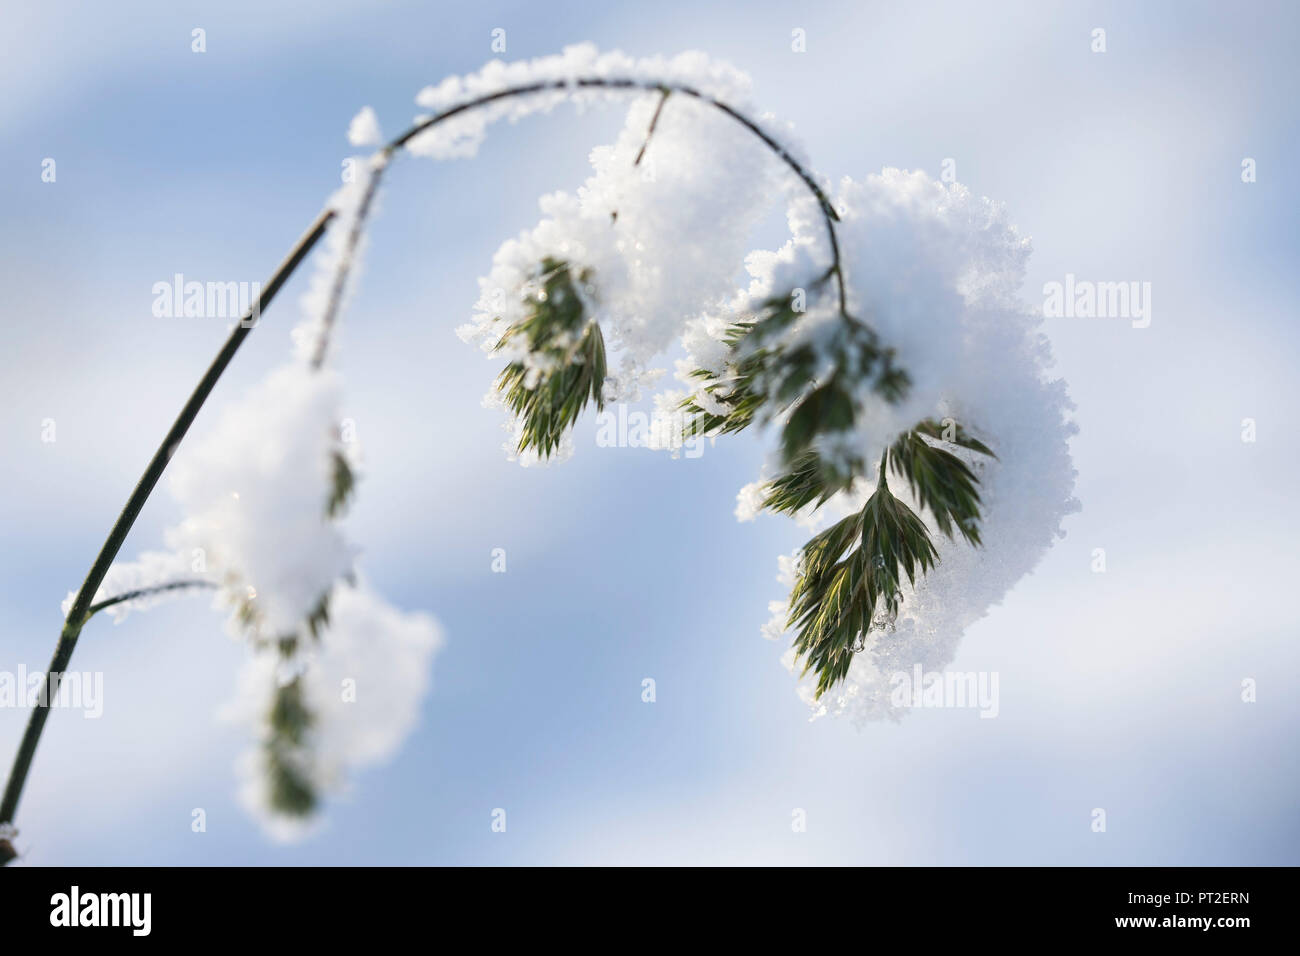 Blade of grass bent under snow load, close-up, Stock Photo